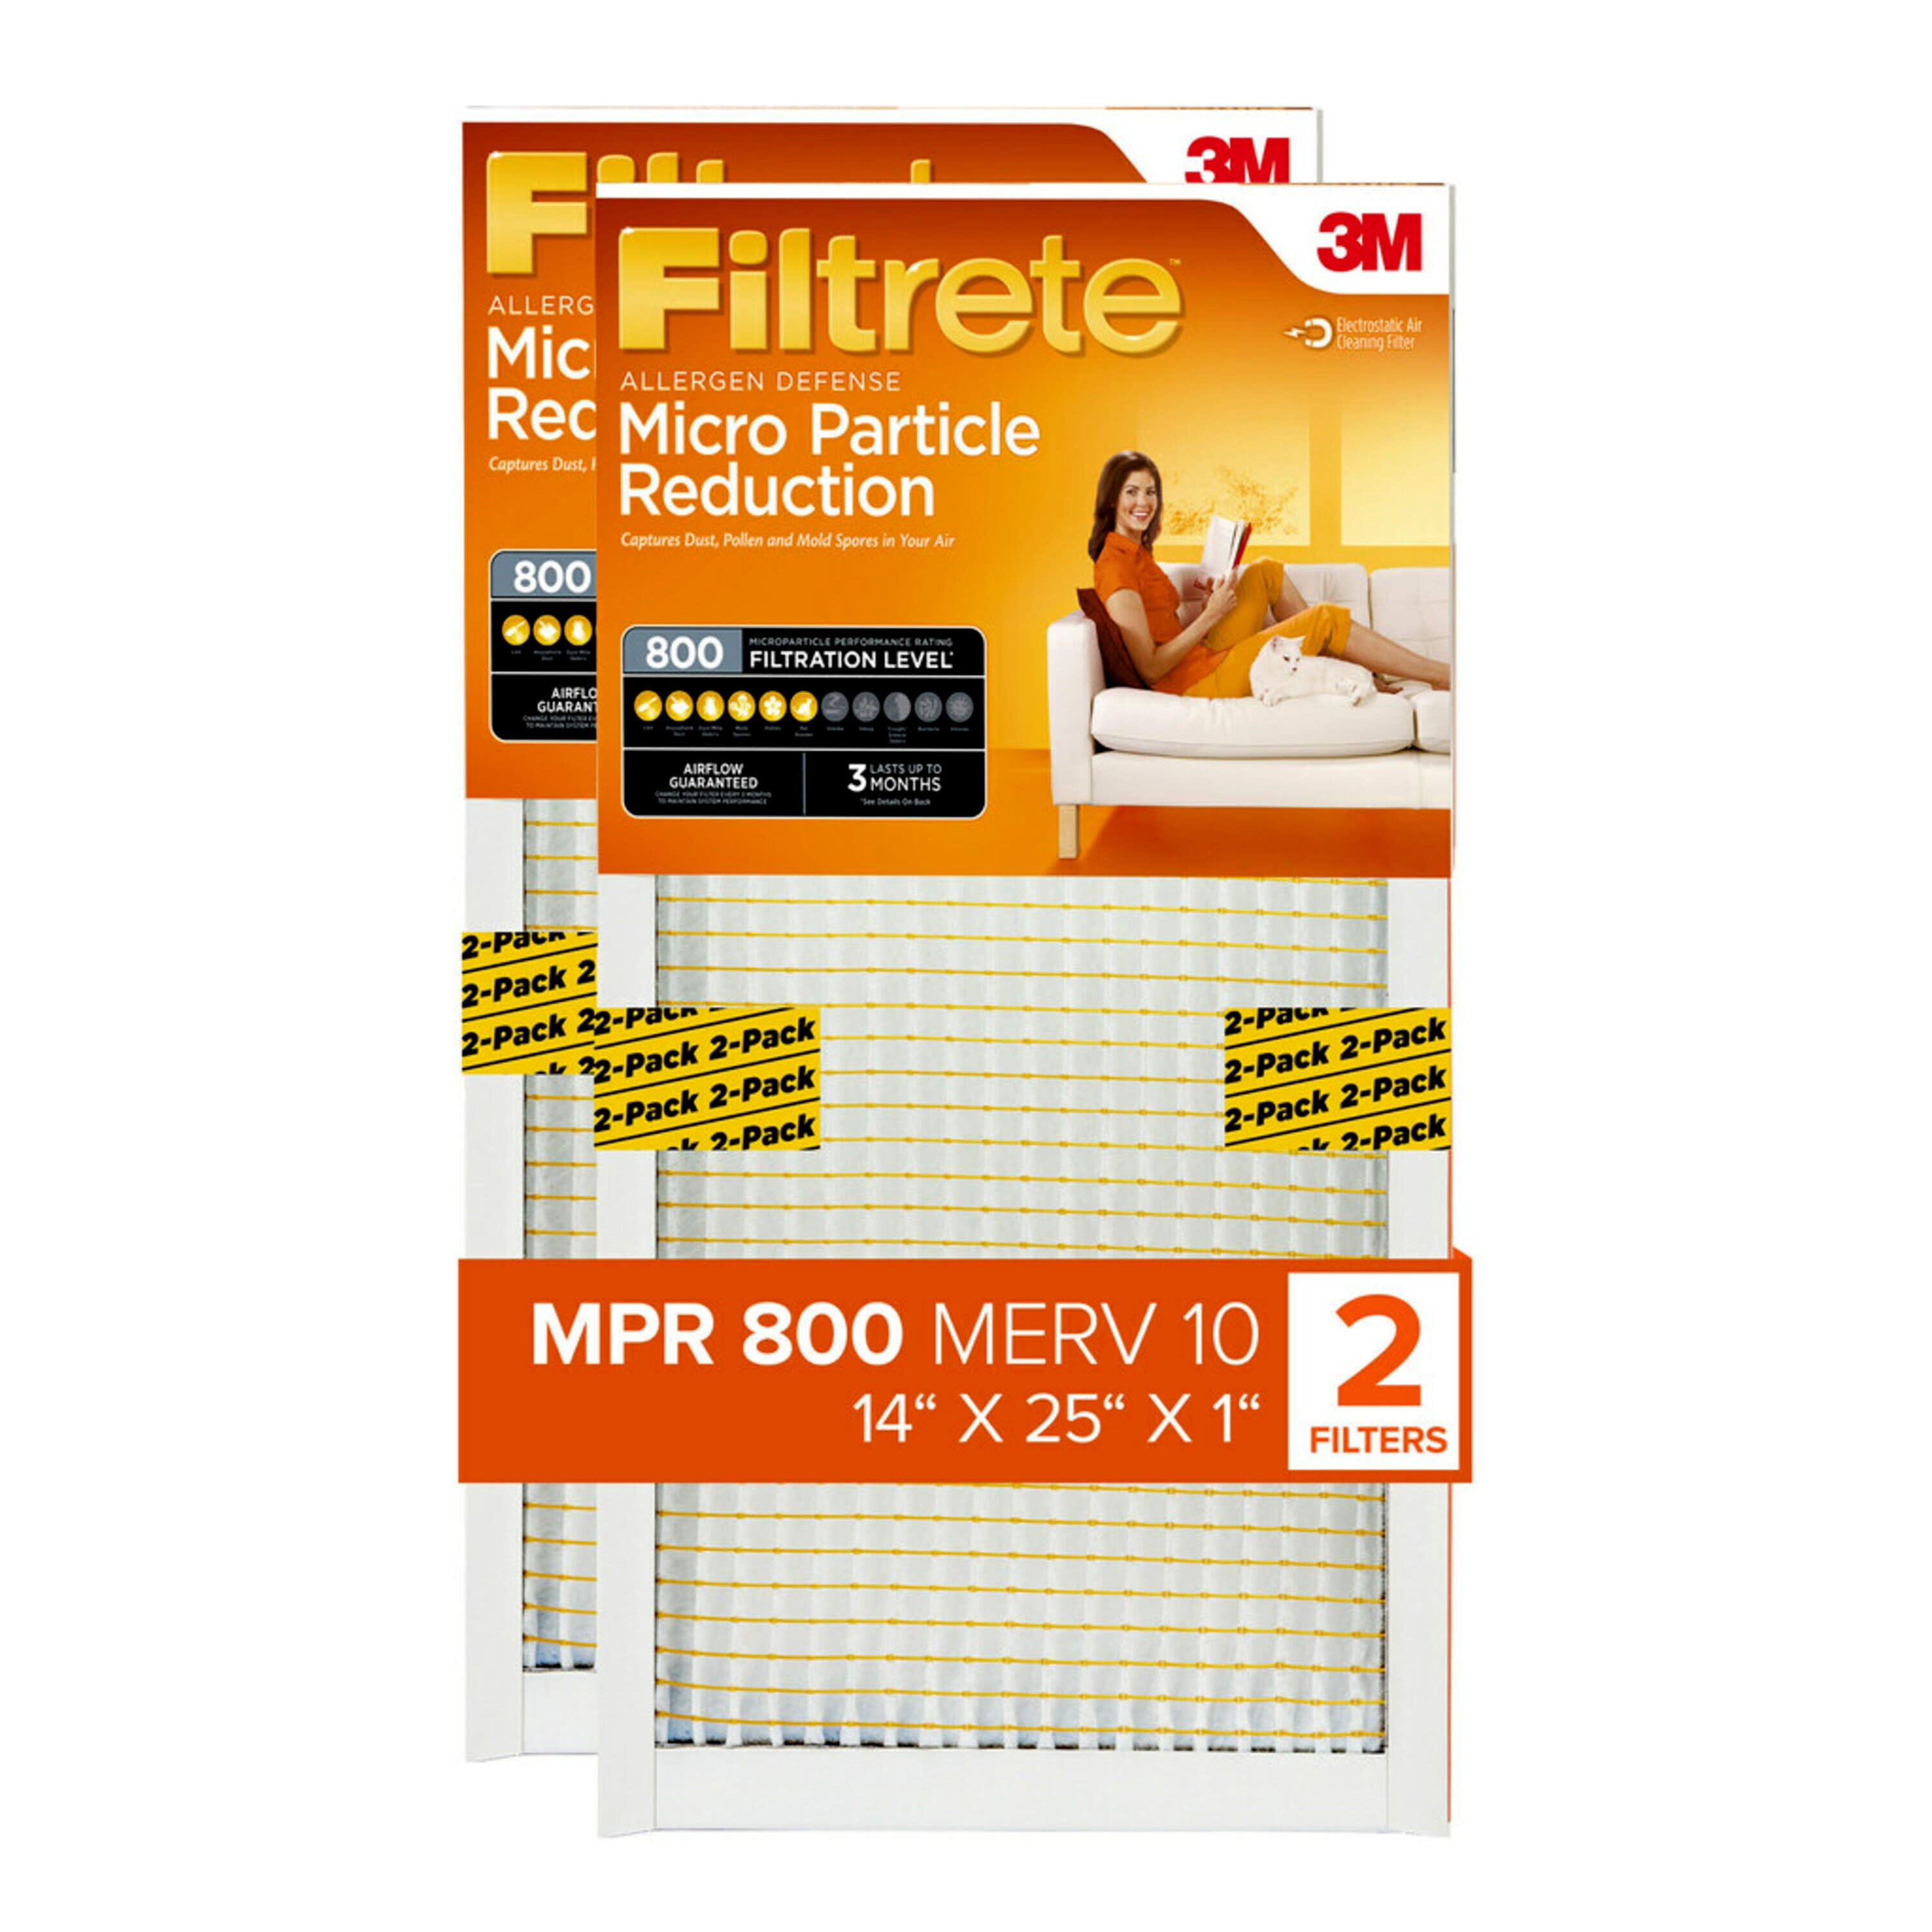 Filtrete by 3M, 14x25x1, MERV 10, Micro Particle Reduction HVAC Furnace Air Filter, Captures Pet Dander and Pollen, 800 MPR, 2 Filters